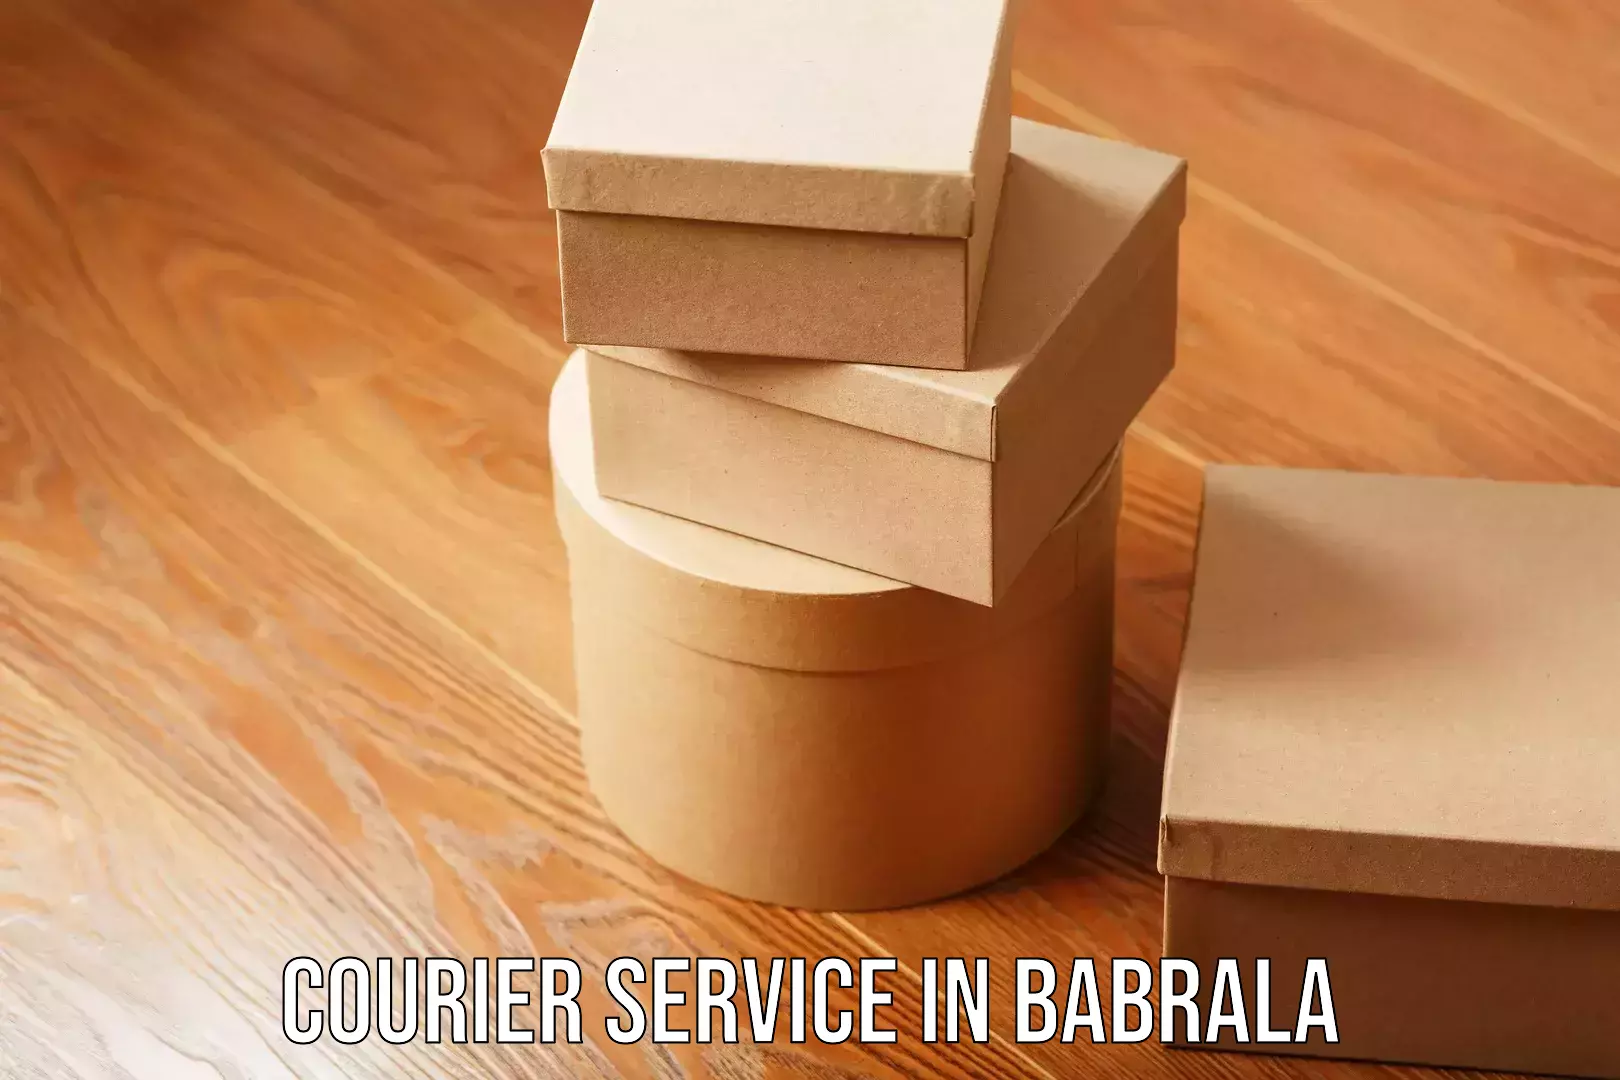 International courier networks in Babrala